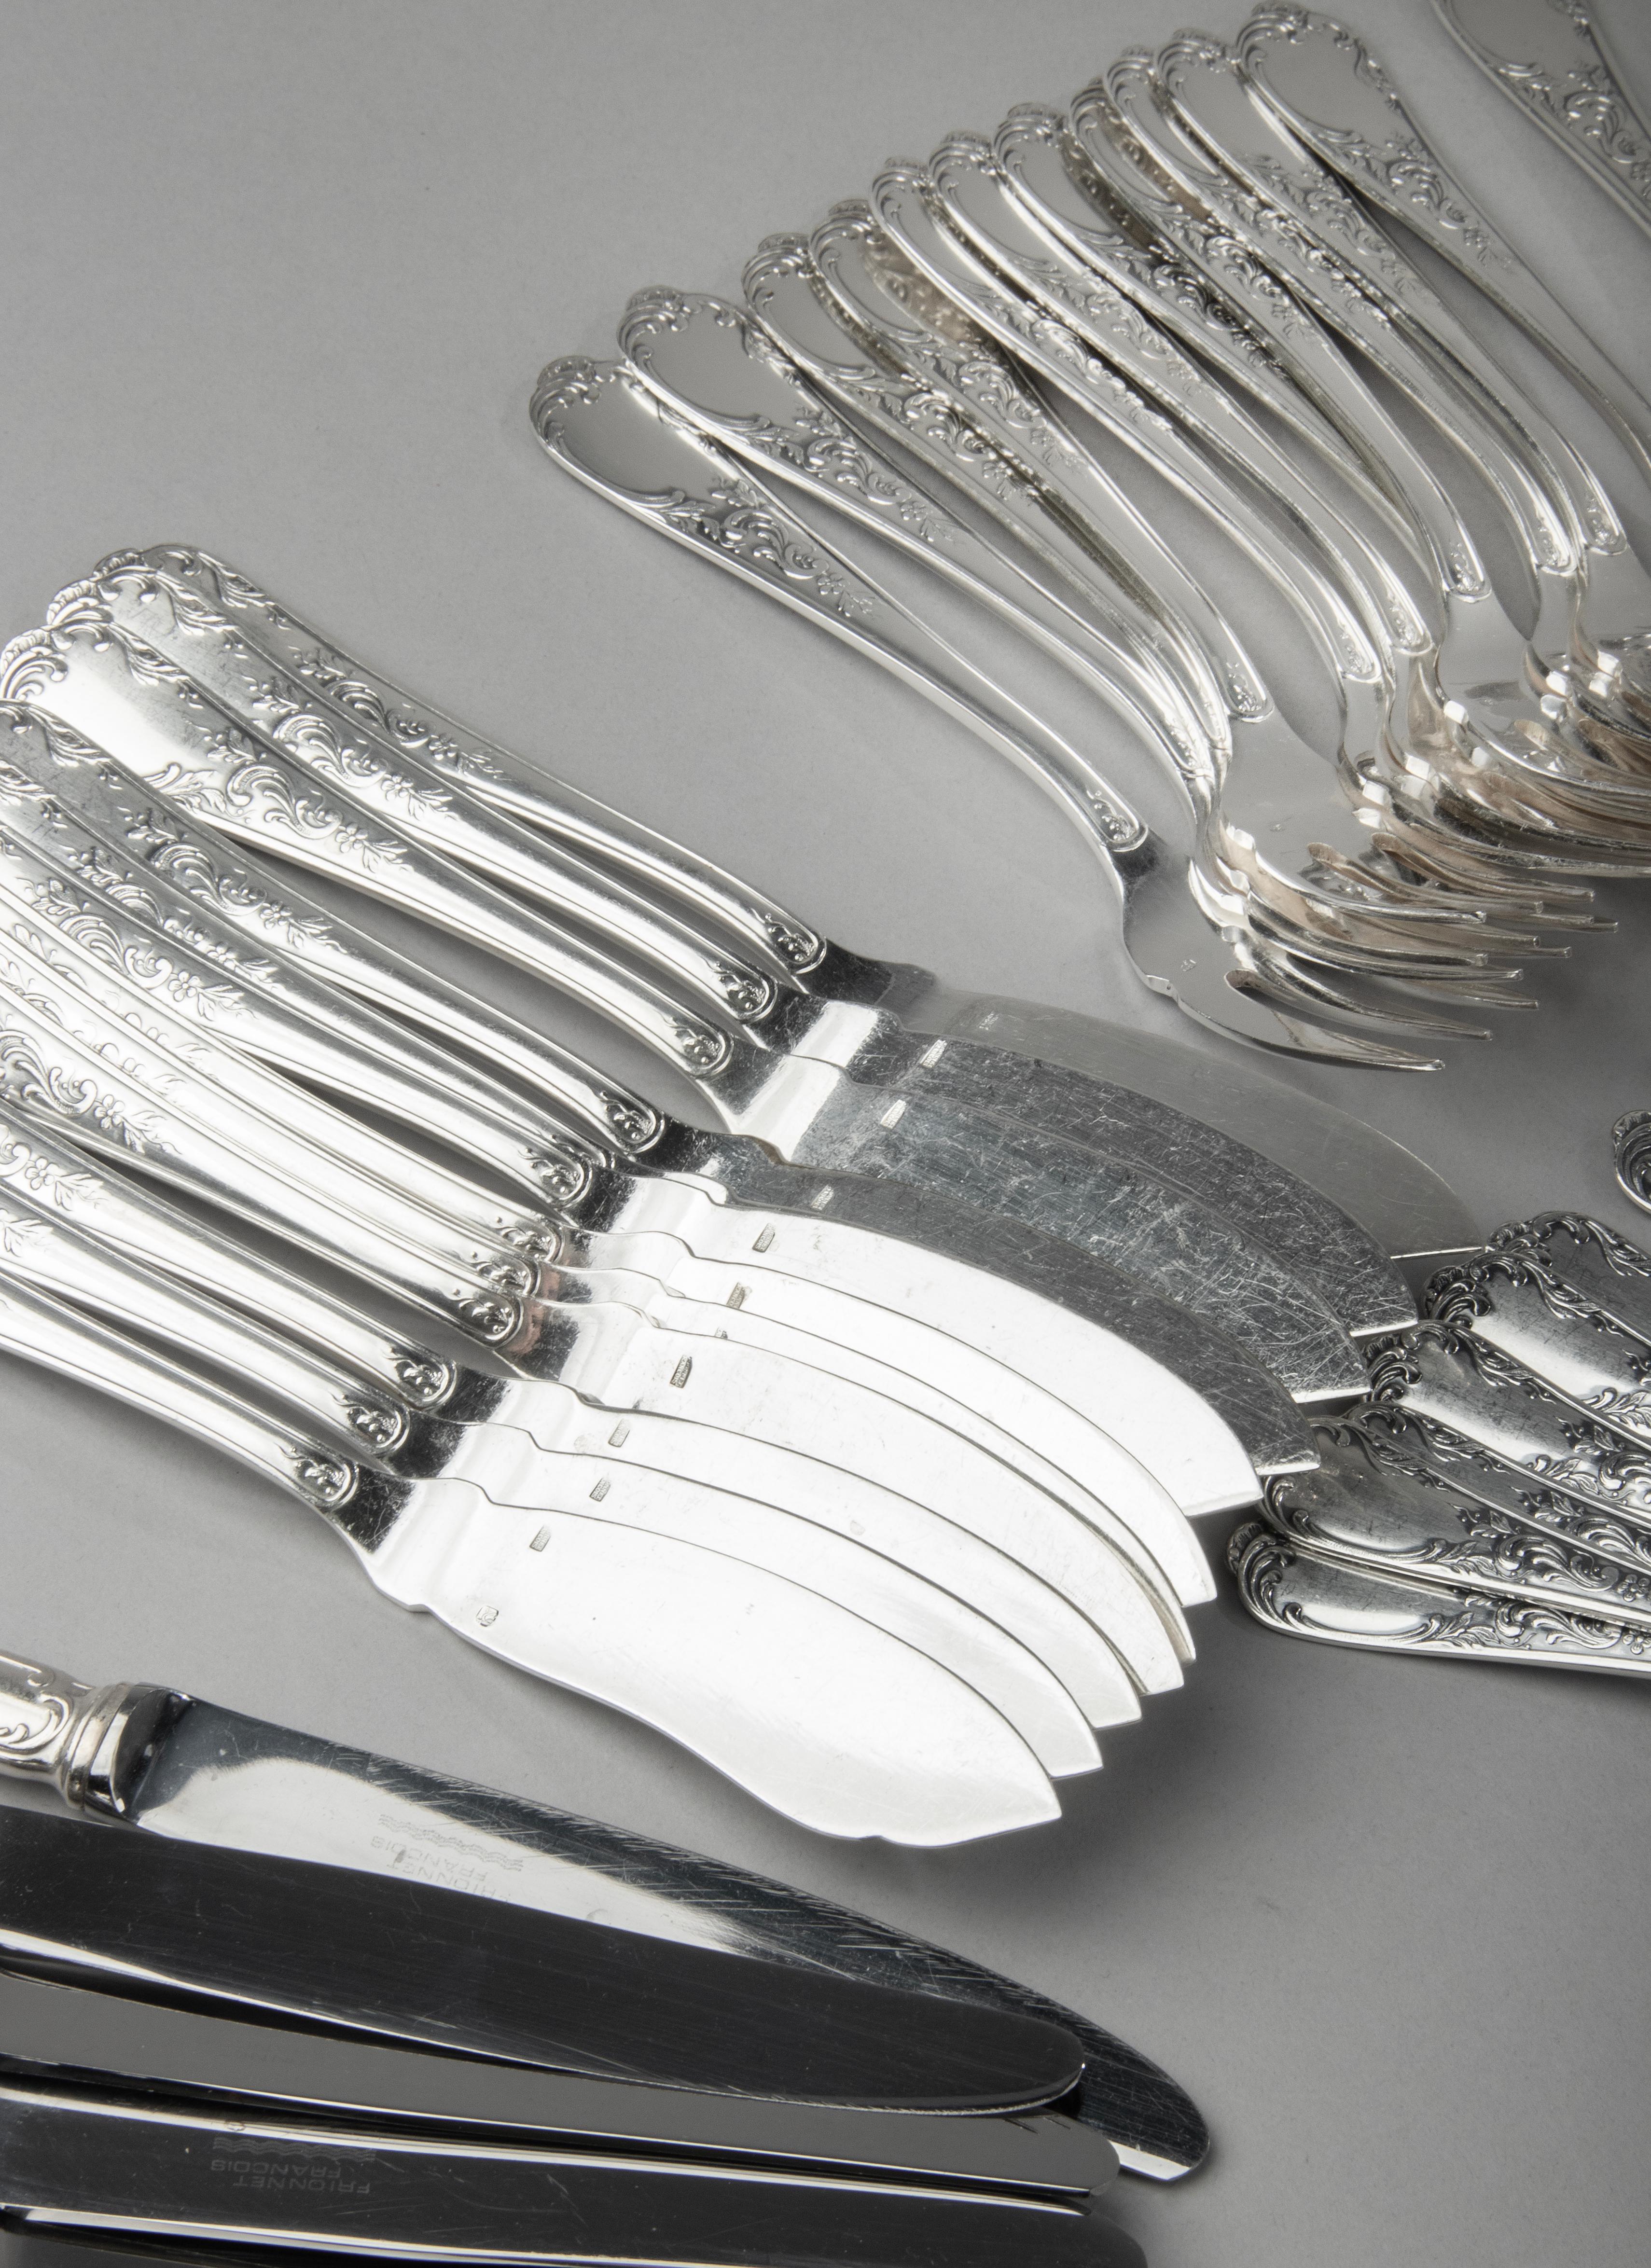 130-Piece Set Silver Plated Flatware, Frionnet France, Rococo Style For Sale 9